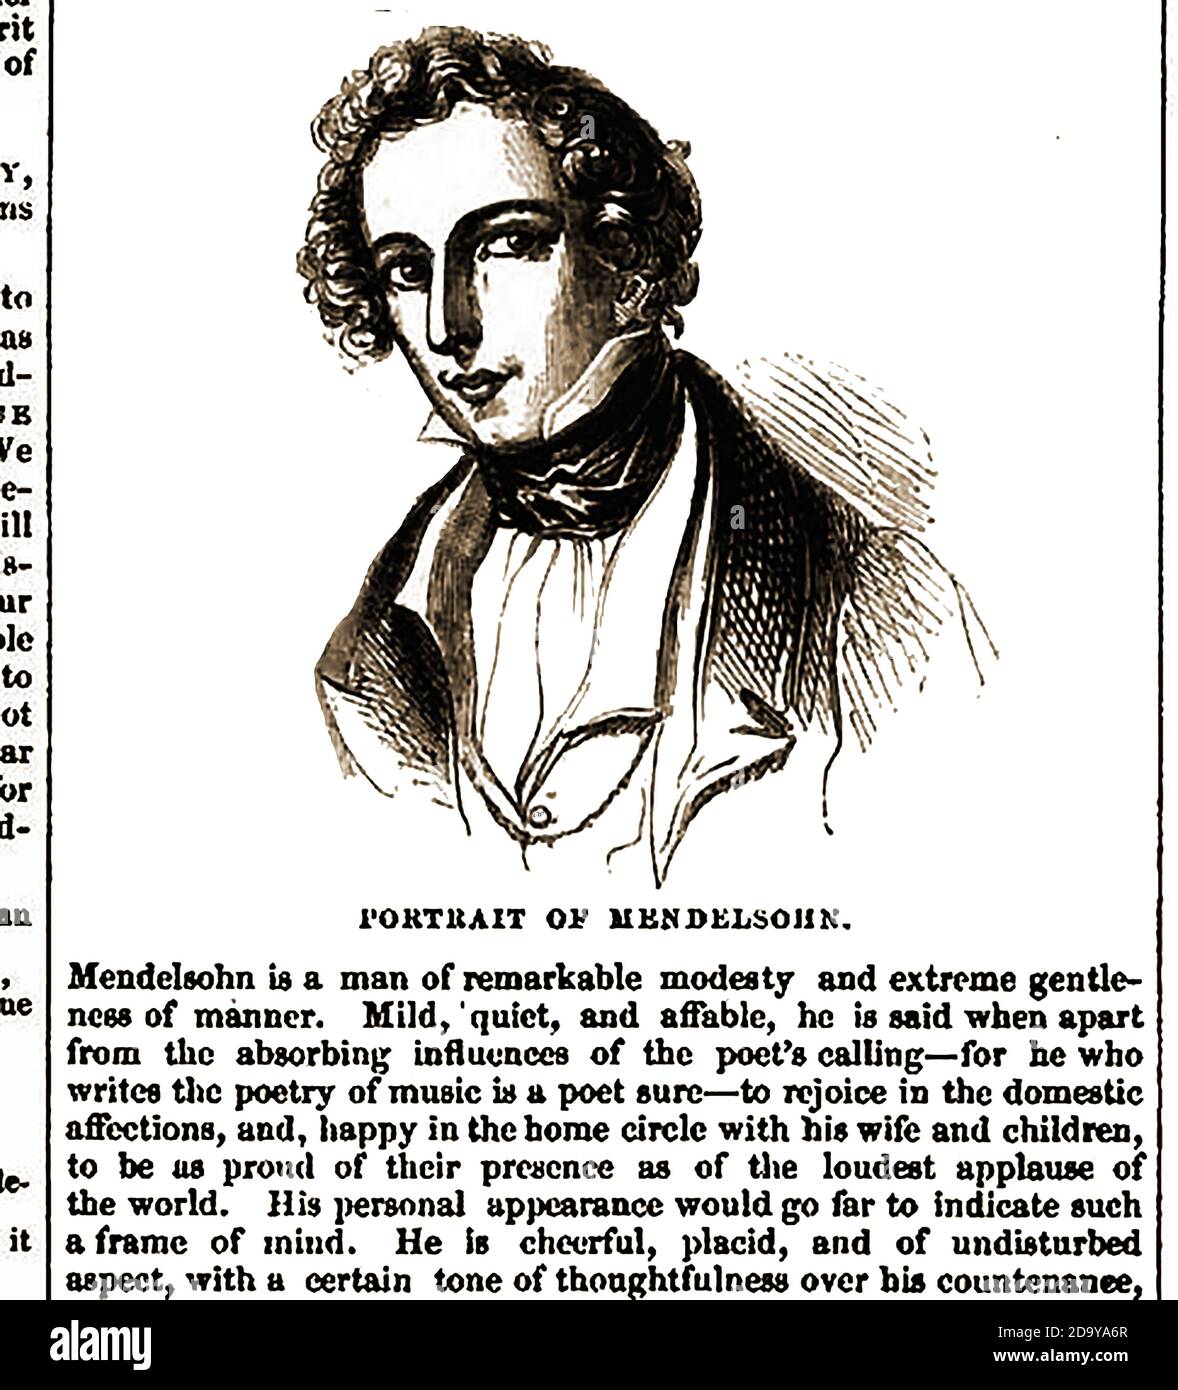 1842  A Portrait and contemporary description of the personality and character of composer Felix Mendelsohn.  --  Fully named Jakob Ludwig Felix Mendelssohn Bartholdy, he was a  German composer, pianist, organist and conductor of the early Romantic period. His  compositions included symphonies, concertos,  organ music, piano music, and chamber music. Stock Photo